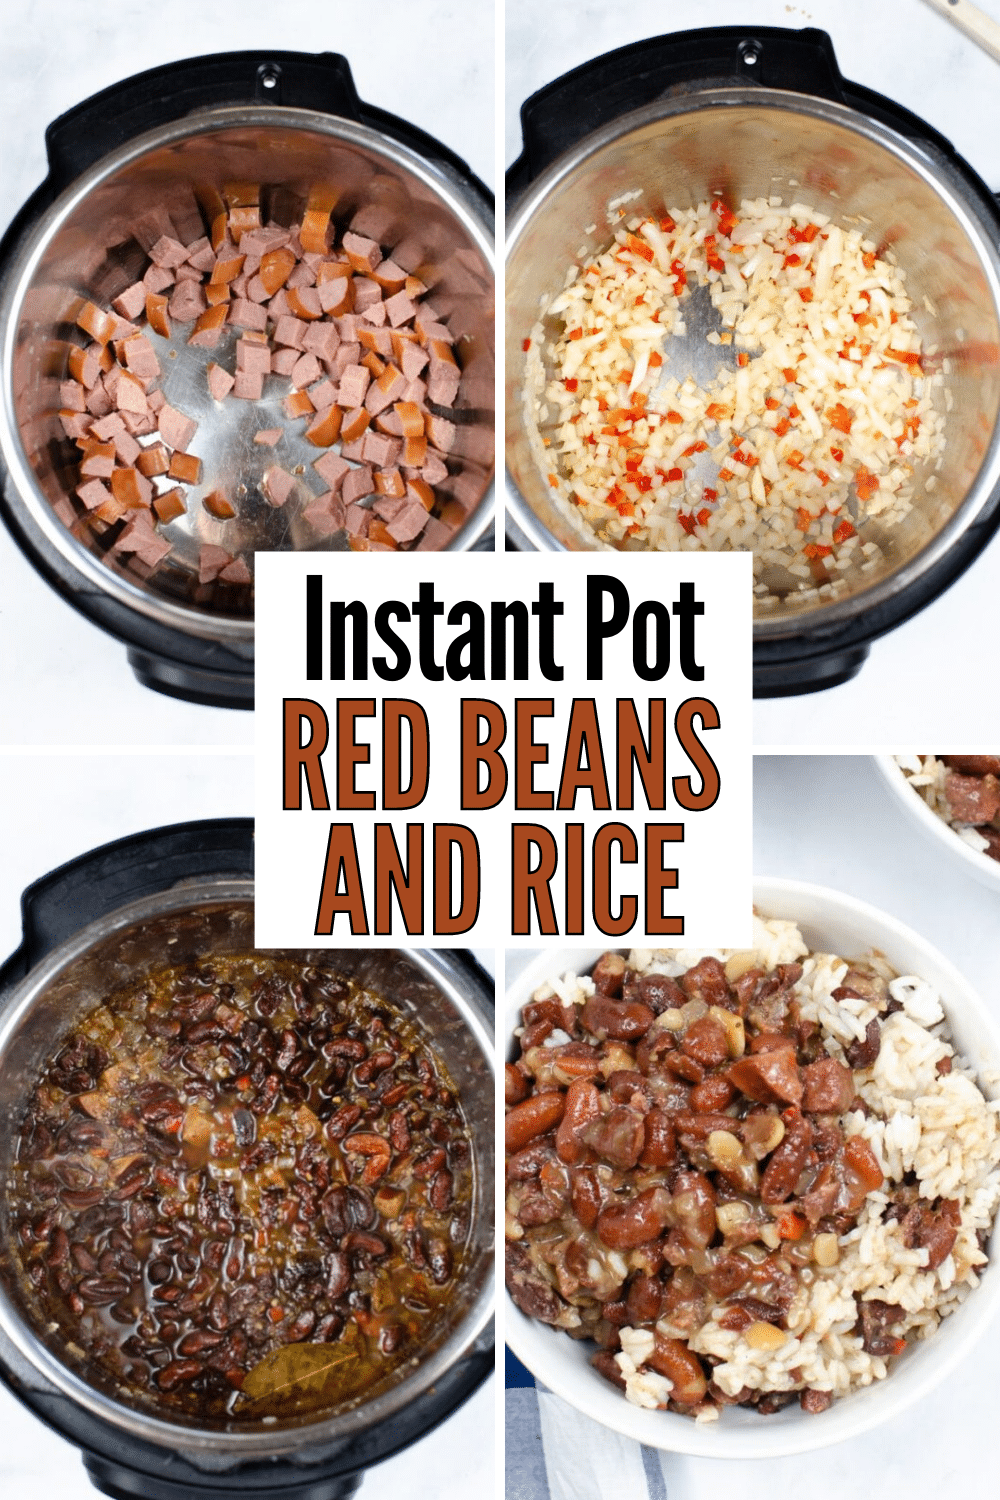 If you want an inexpensive healthy meal, you should try Instant Pot Red Beans and Rice. It's full of protein, fiber, vitamins & antioxidants. #instantpot #pressurecooker #redbeansandrice #healthyeating via @wondermomwannab